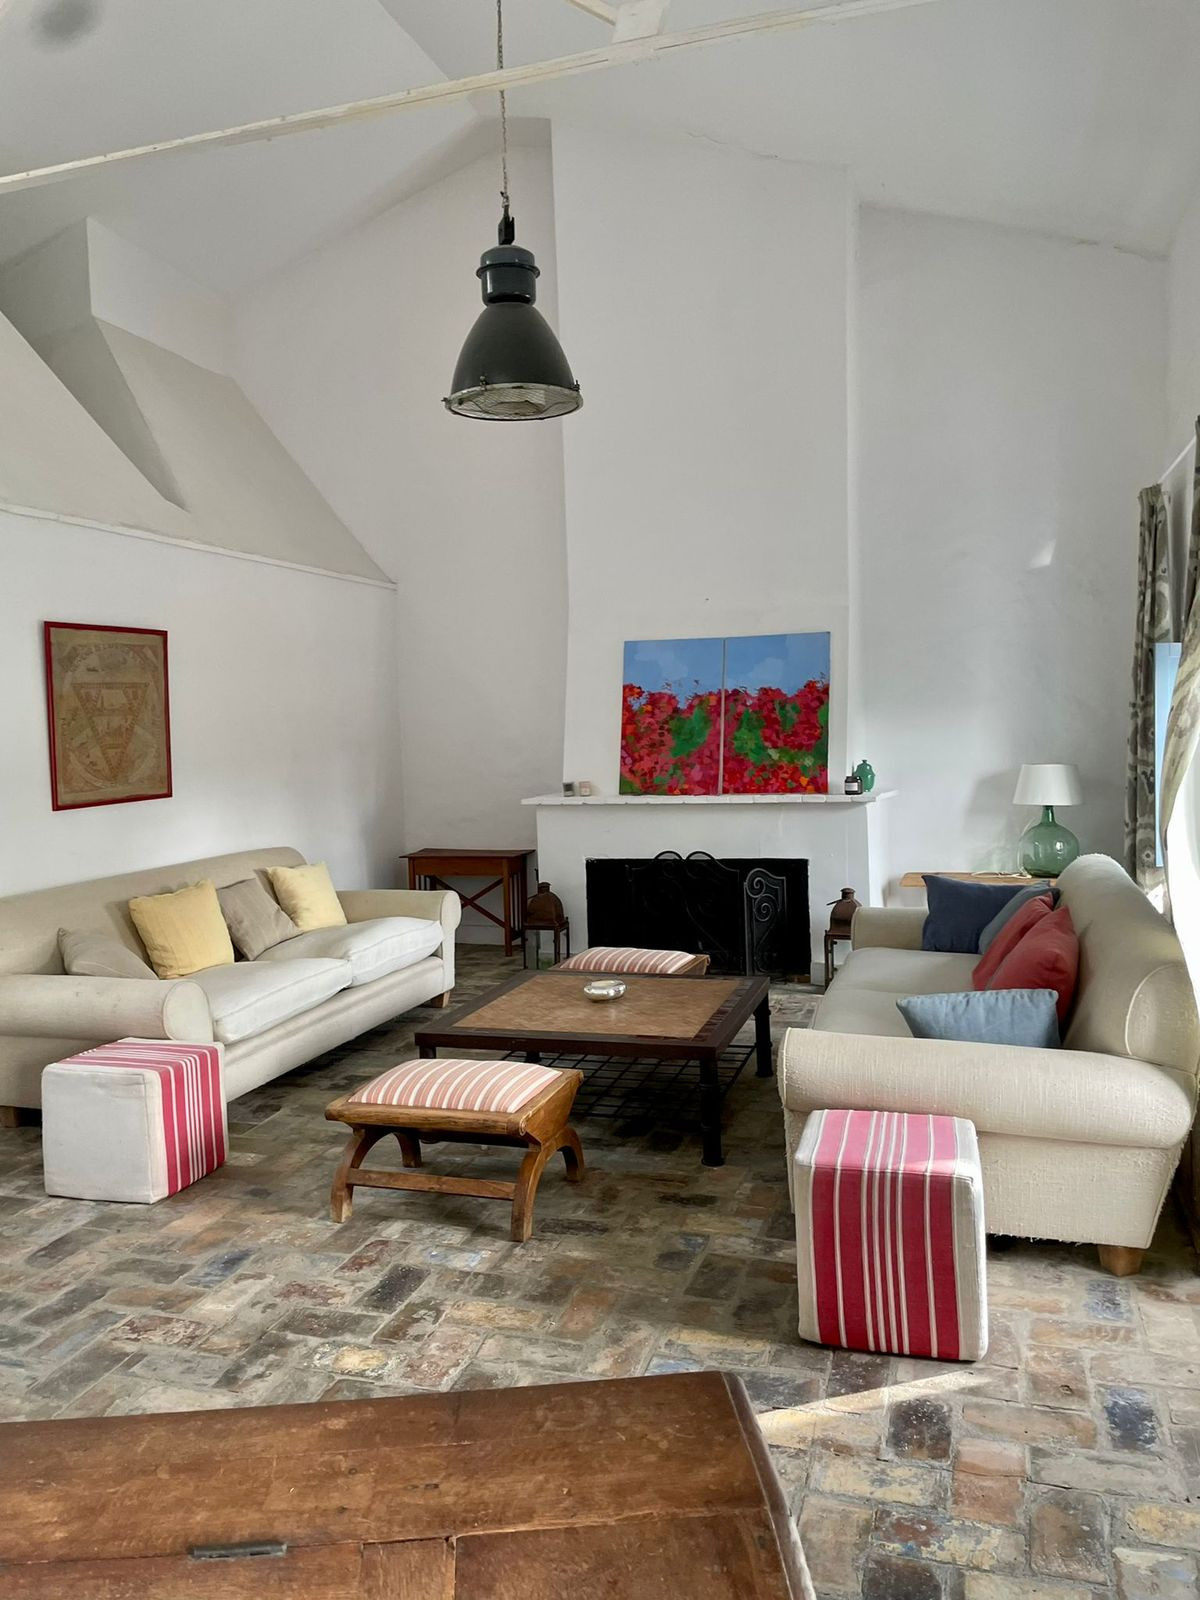 Here we have a property which has been converted from an old rice mill in San Martin del Tesorillo, in the urbanisation of El Molino.